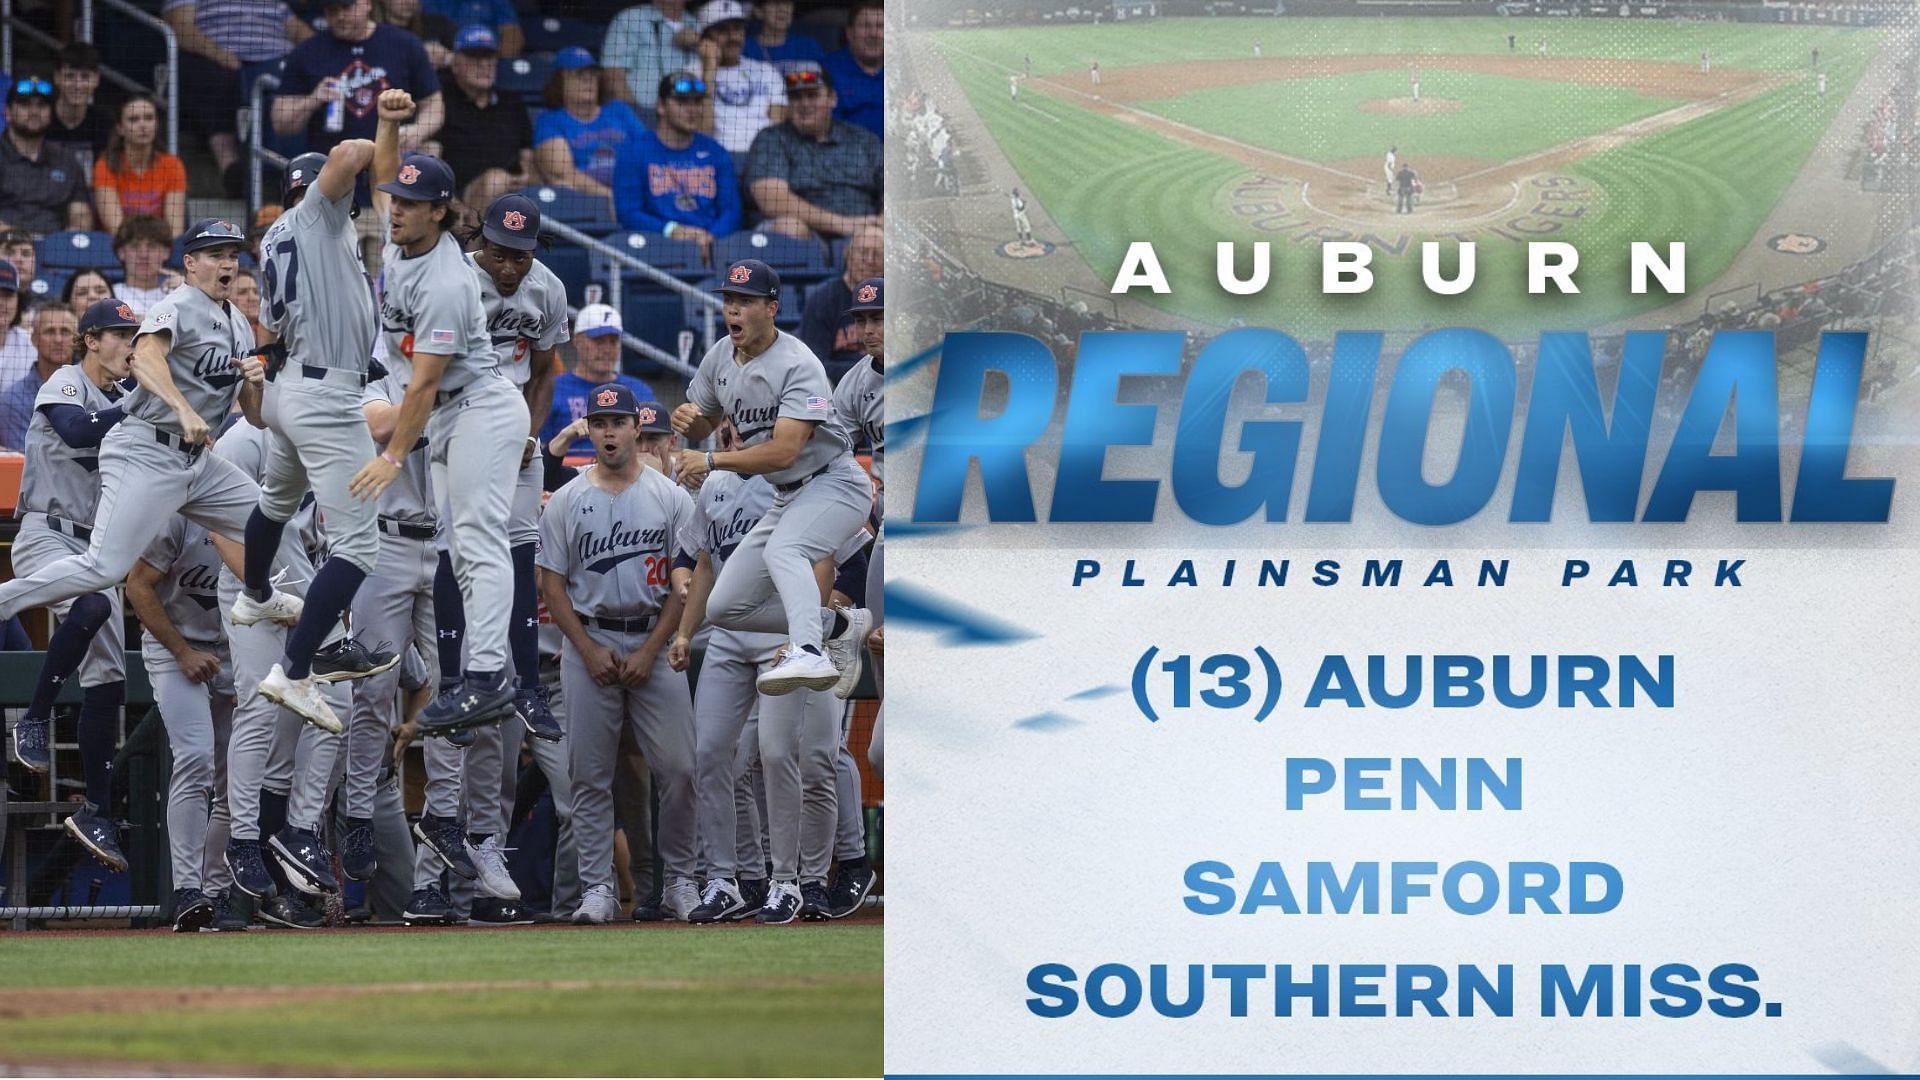 The Auburn Regional Tournament for NCAA baseball is set to kick off on June 2nd